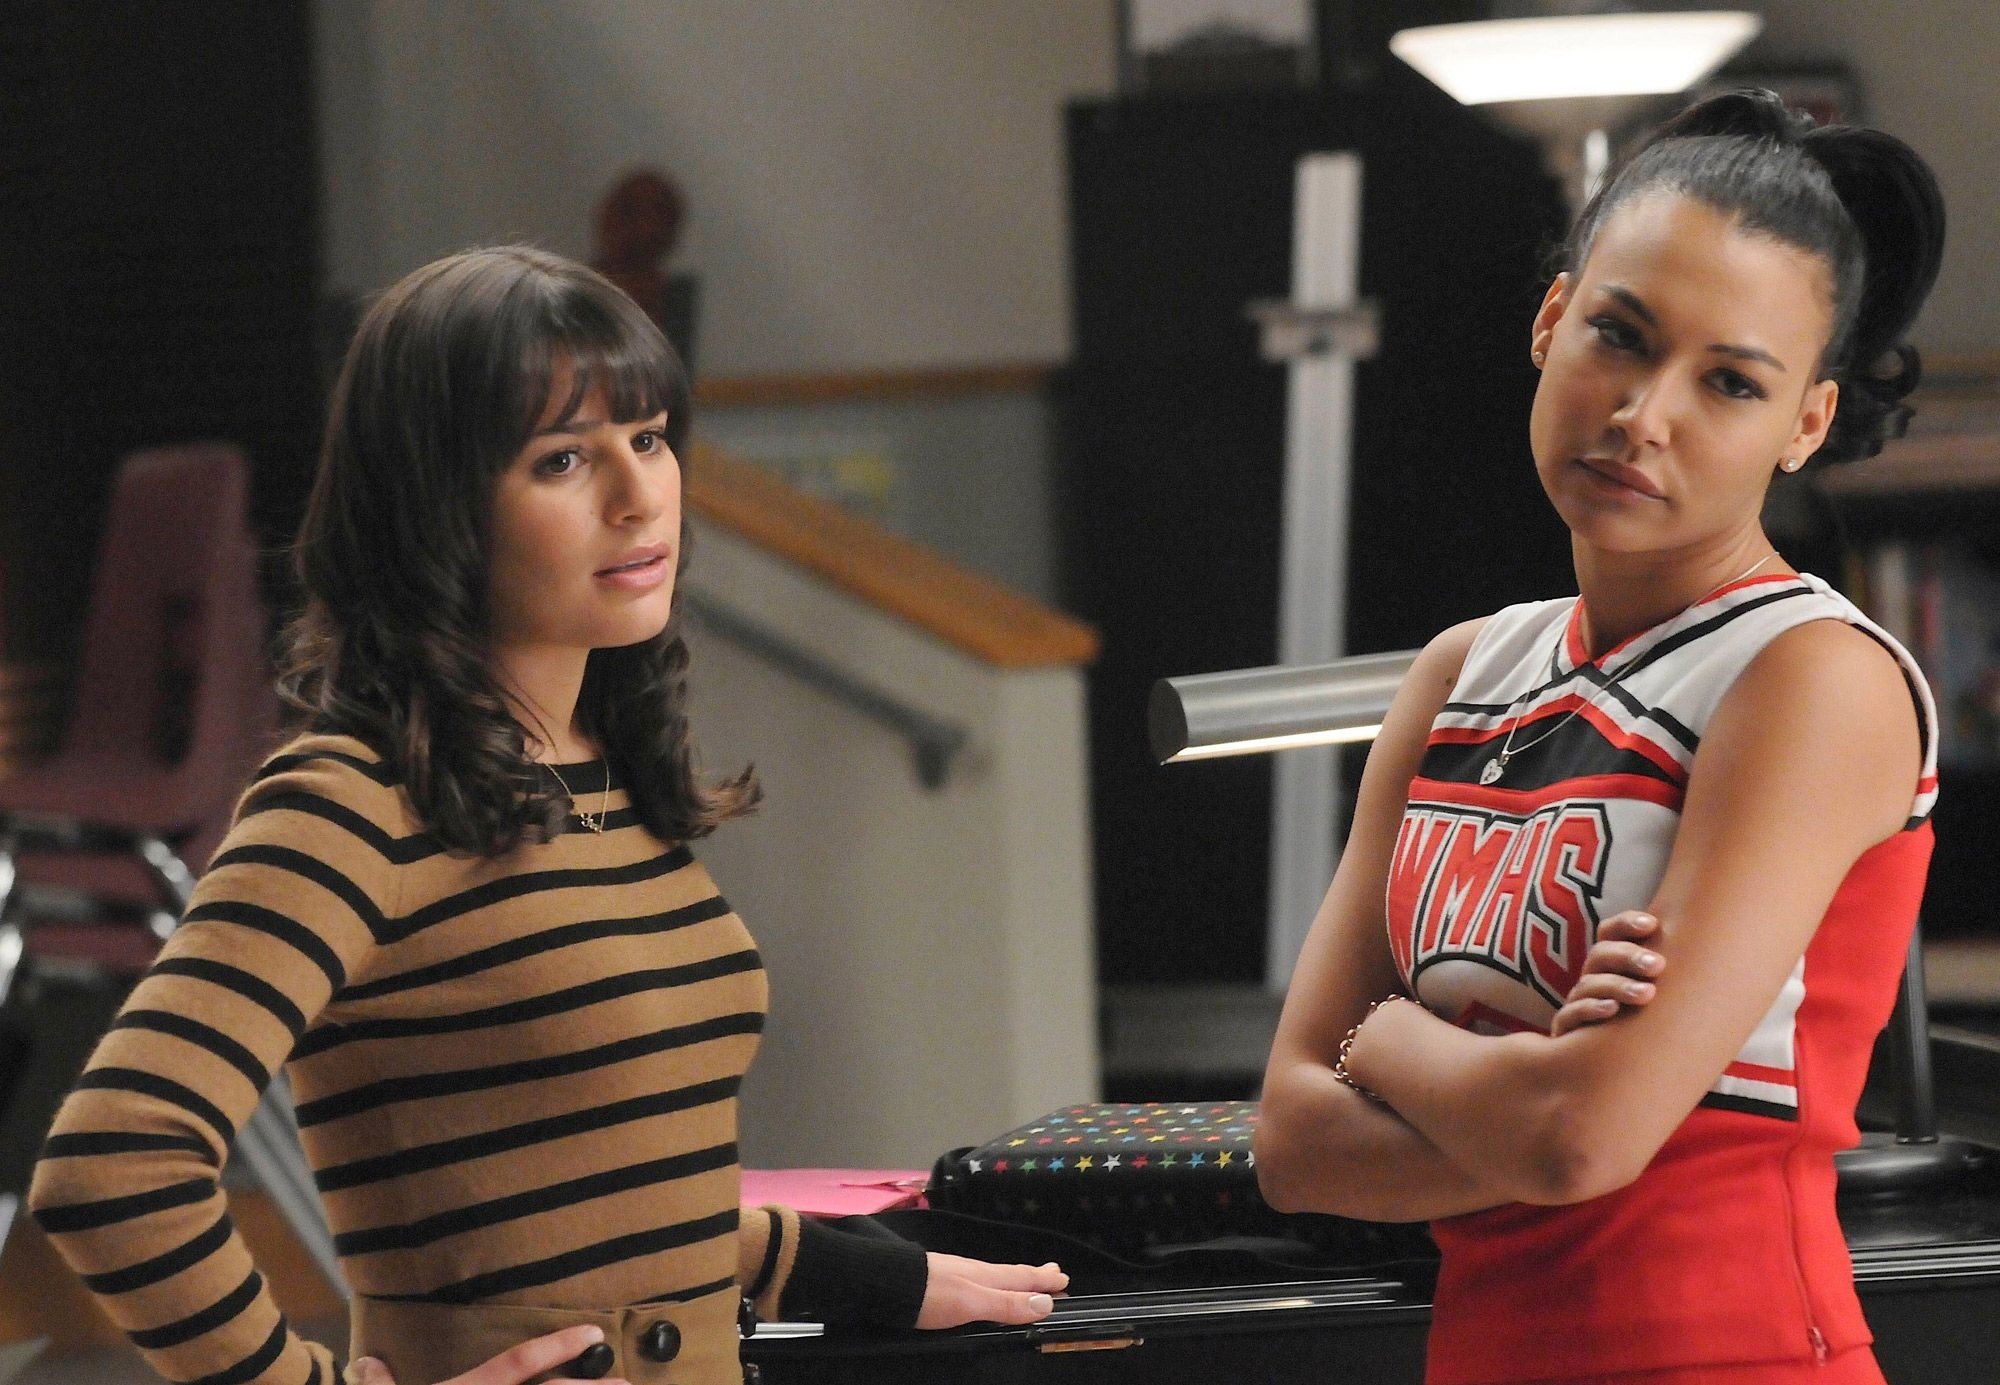 Two characters from Glee, Rachel in a striped sweater and Santana in a cheerleader outfit, stand in a library